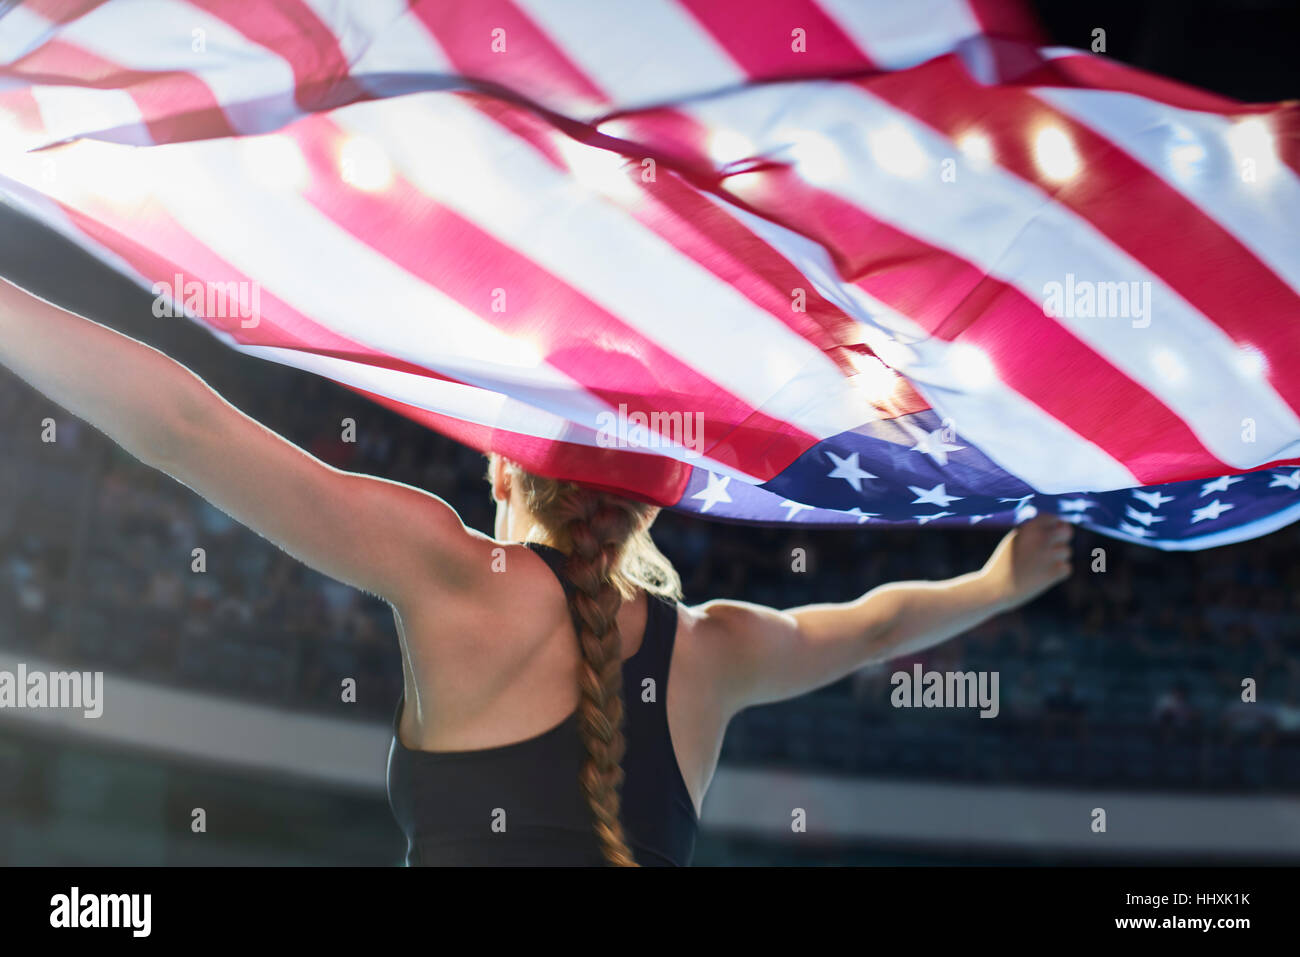 Female athlete running victory lap with American flag Stock Photo